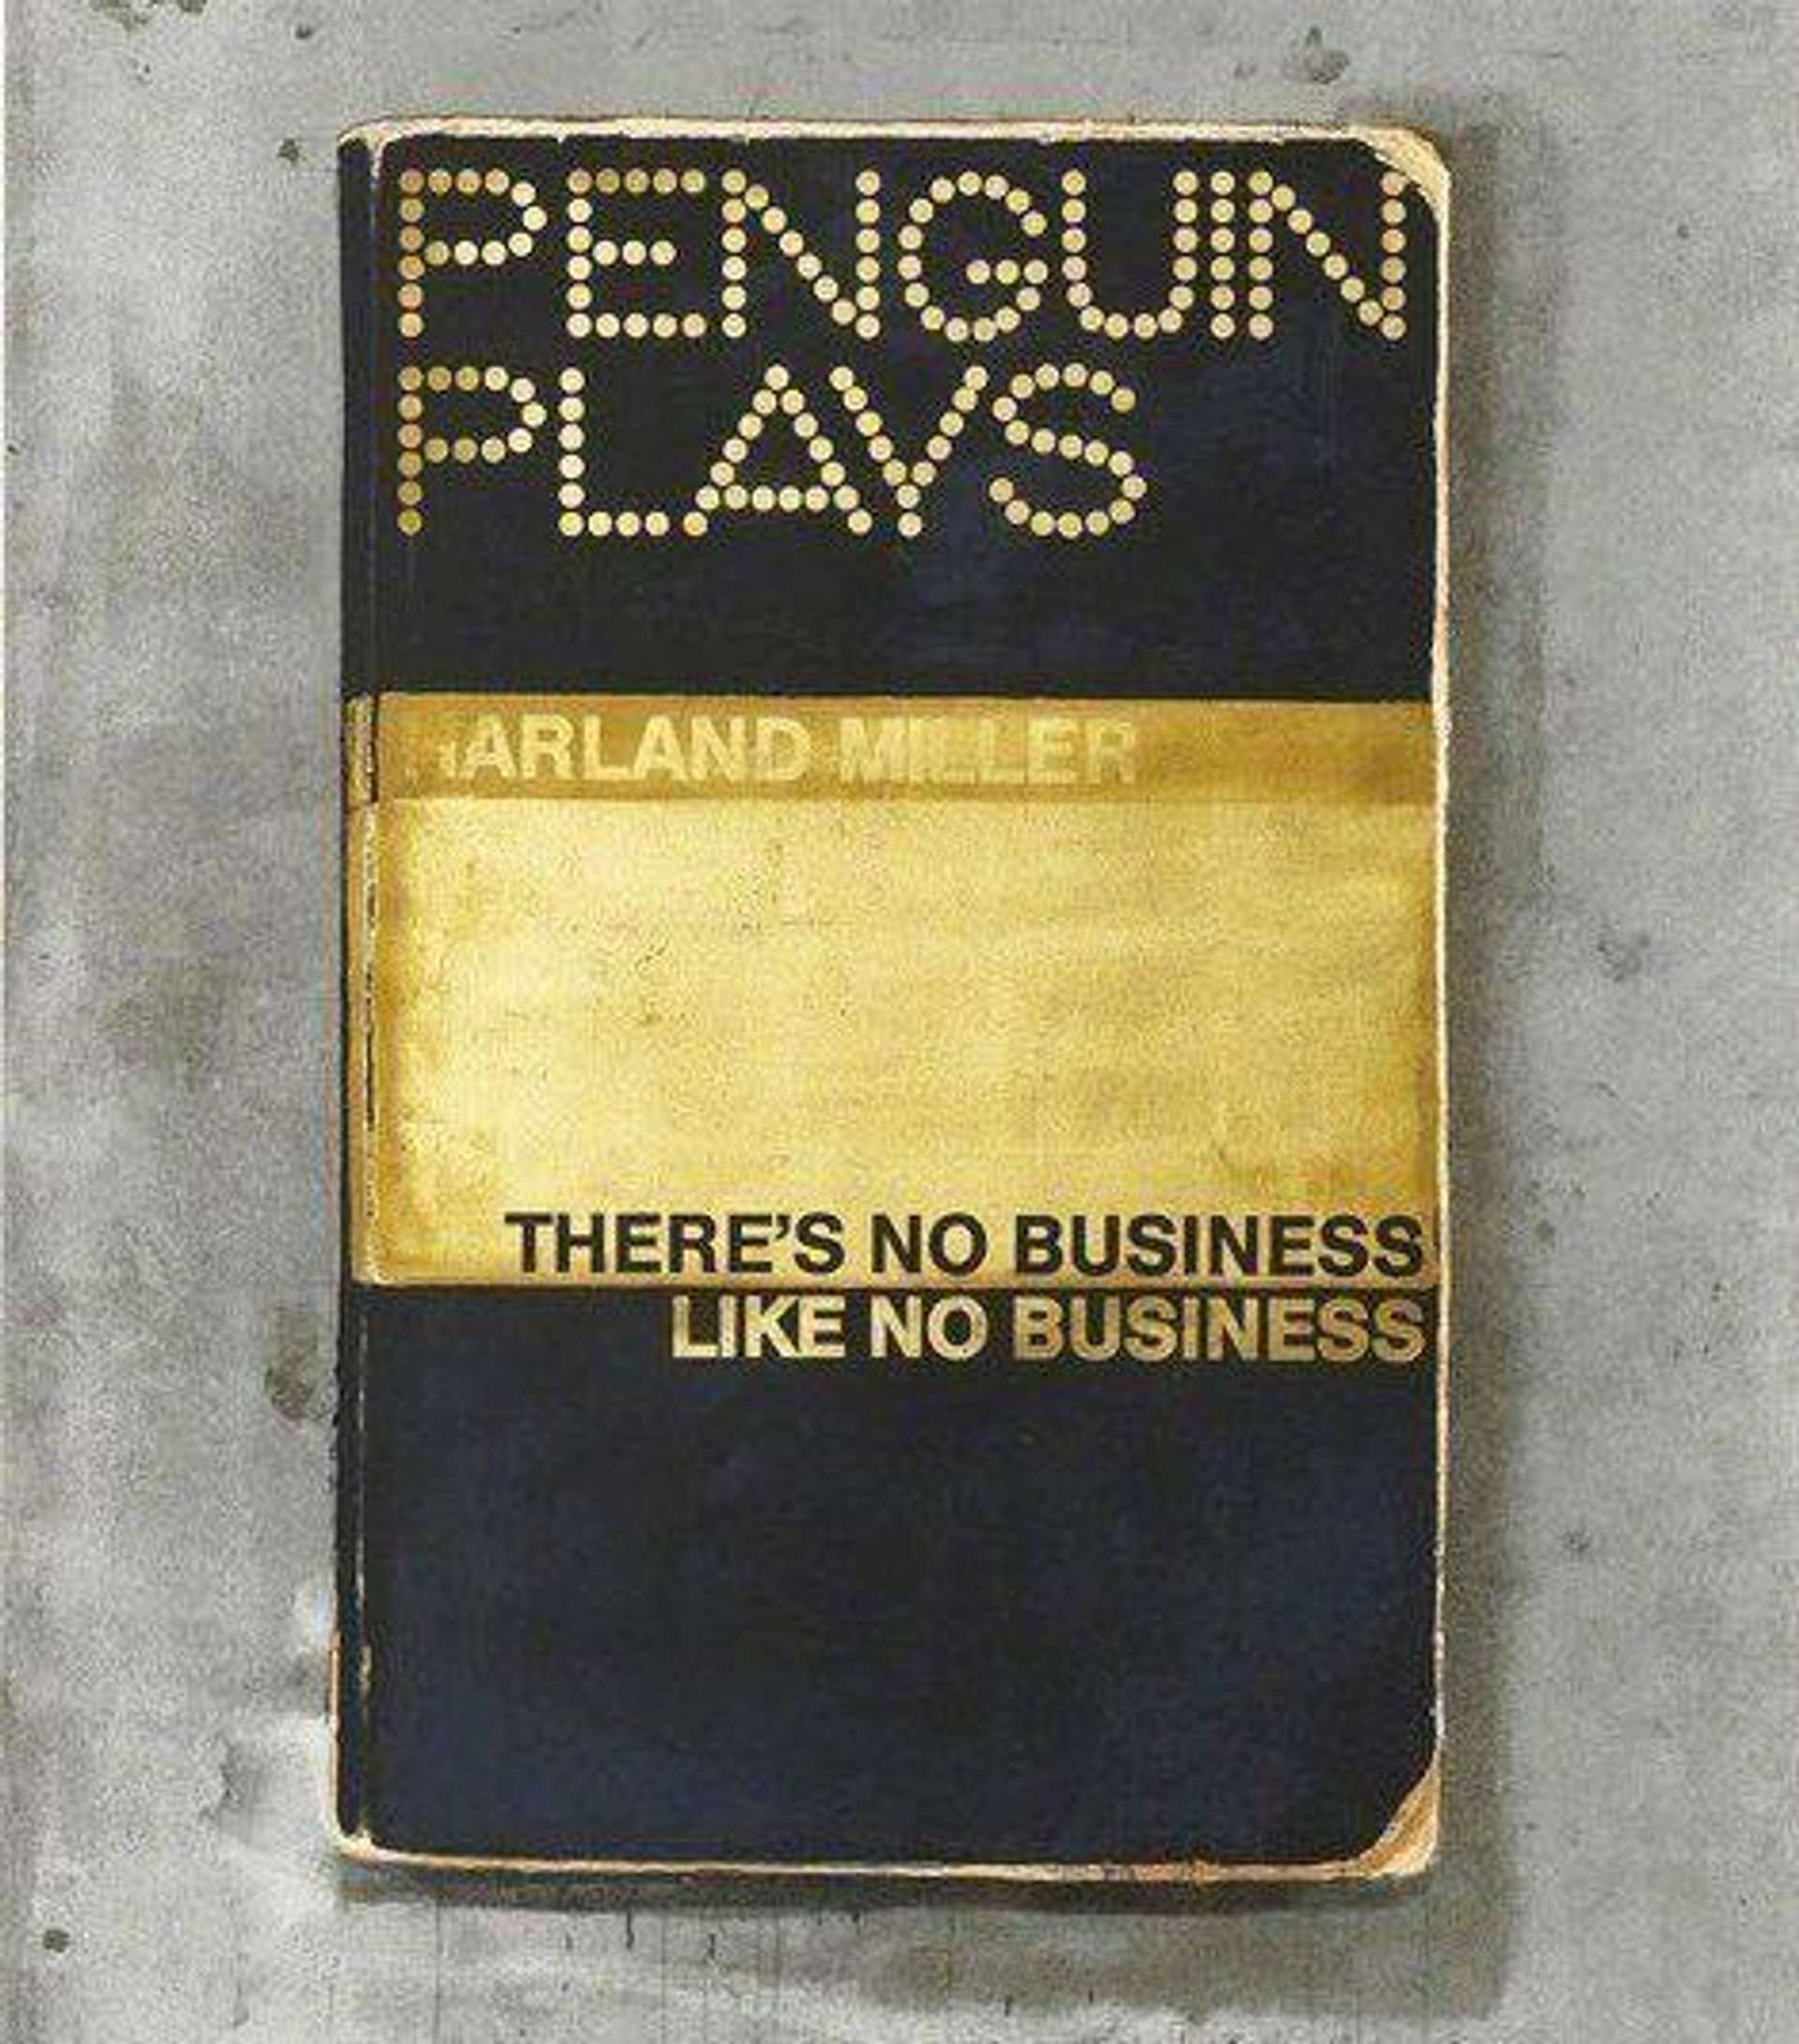 Harland Miller: There’s No Business Like No Business - Signed Print